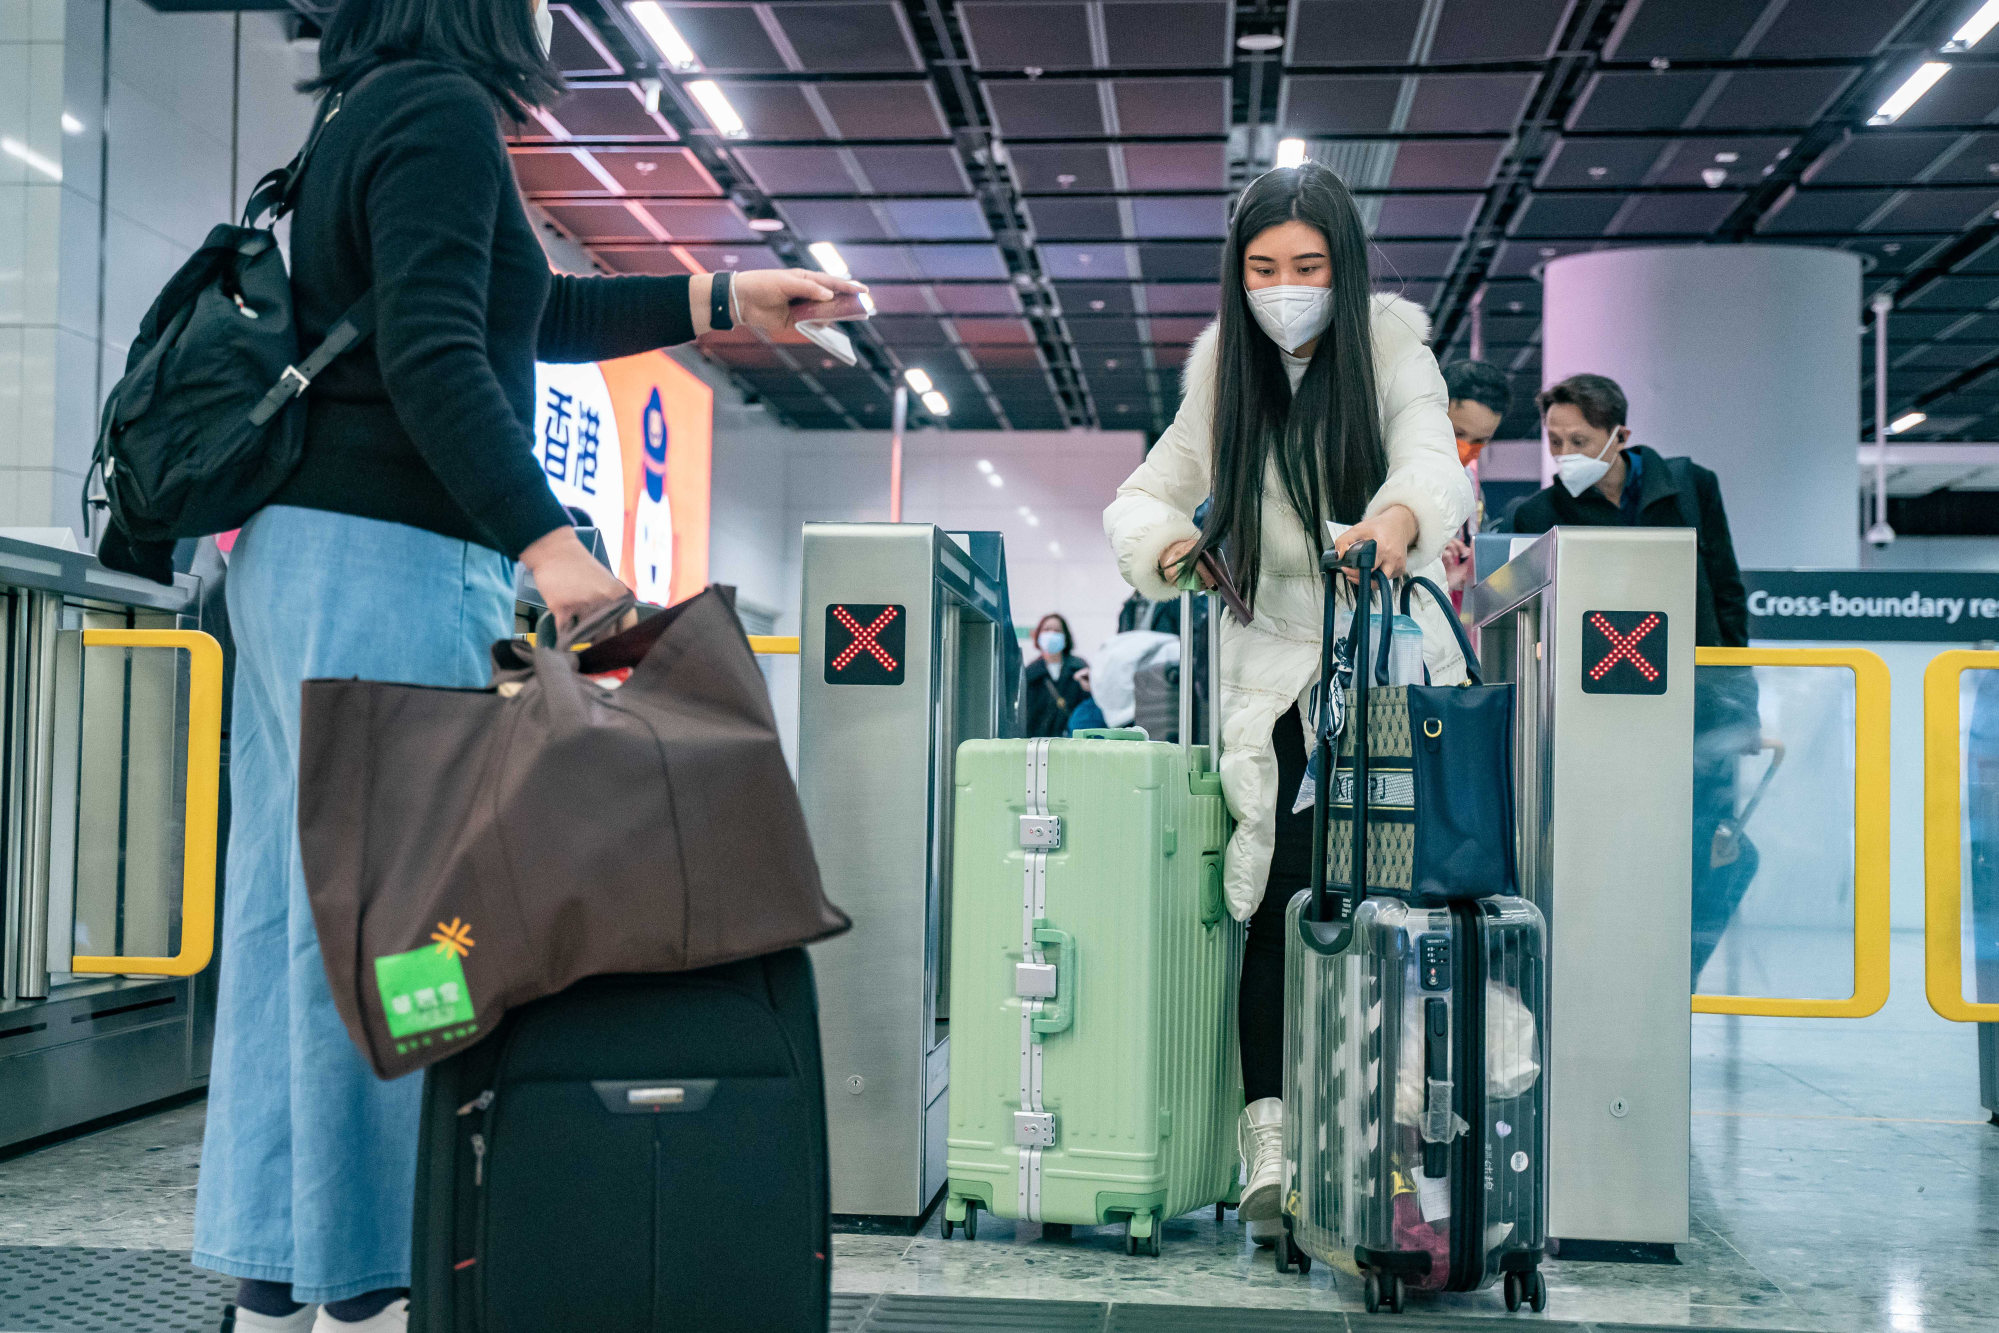 BA&SH expects to quadruple sales in Greater China - Inside Retail Asia